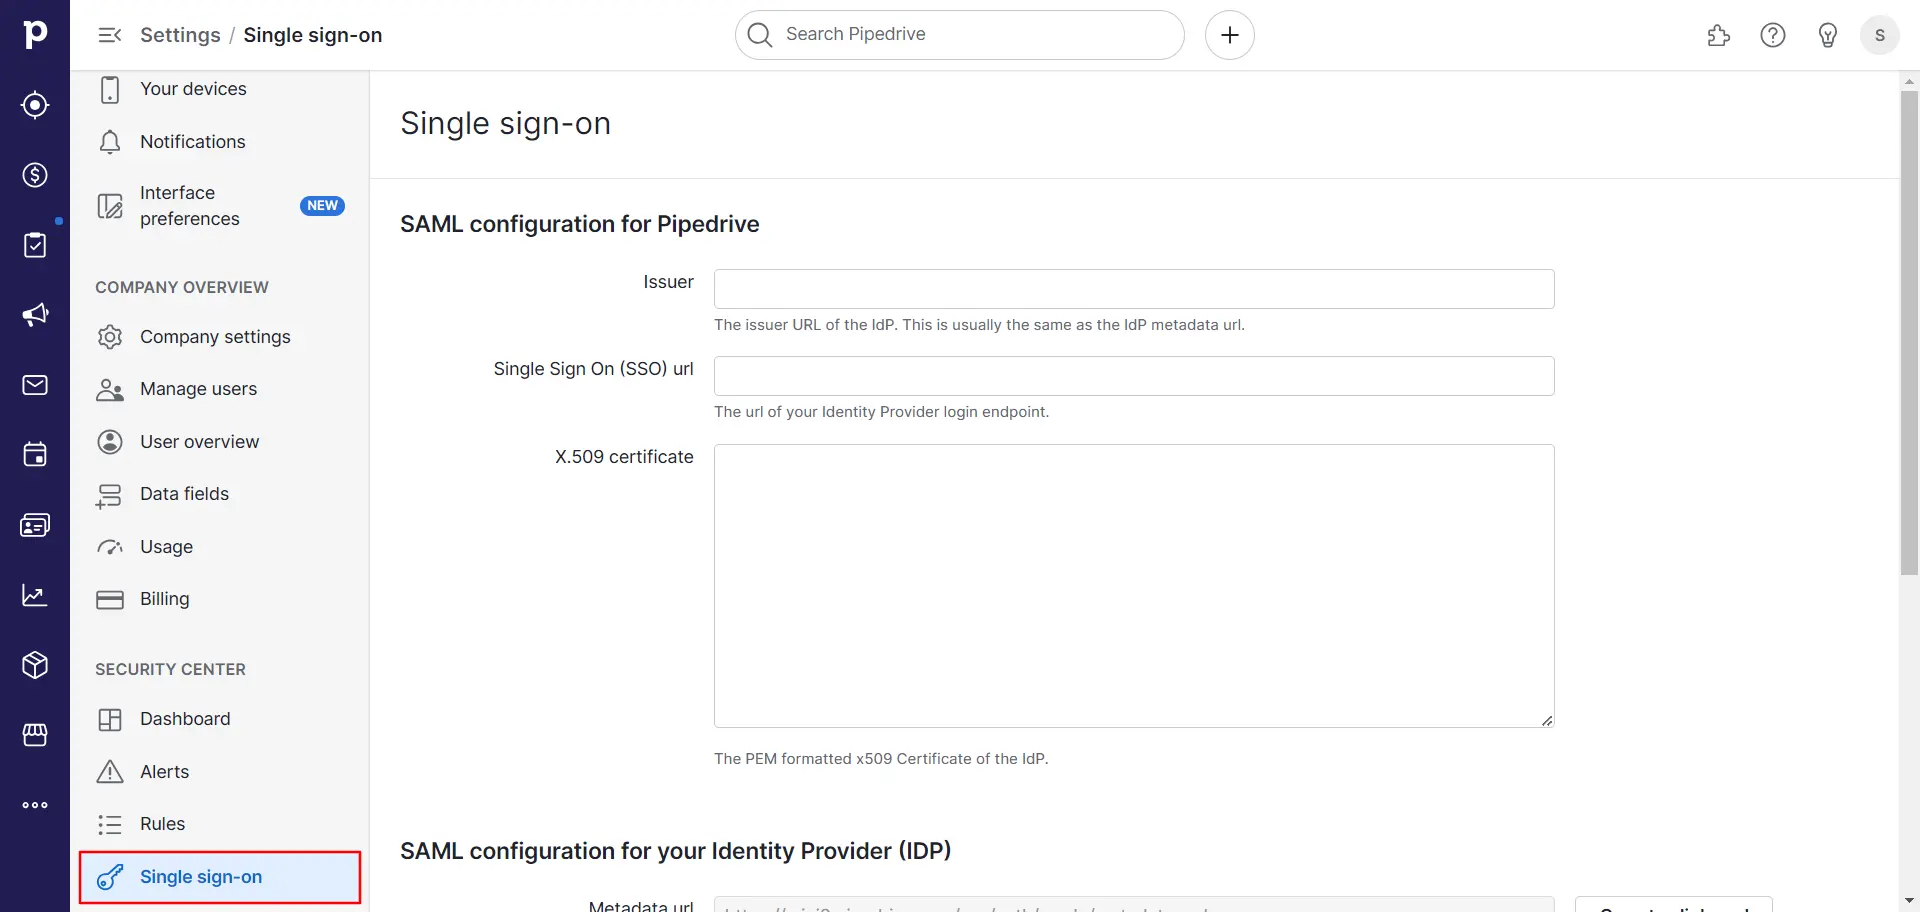 PipeDrive Single Sign-On (SSO) Select Single sign-on and provide the required information